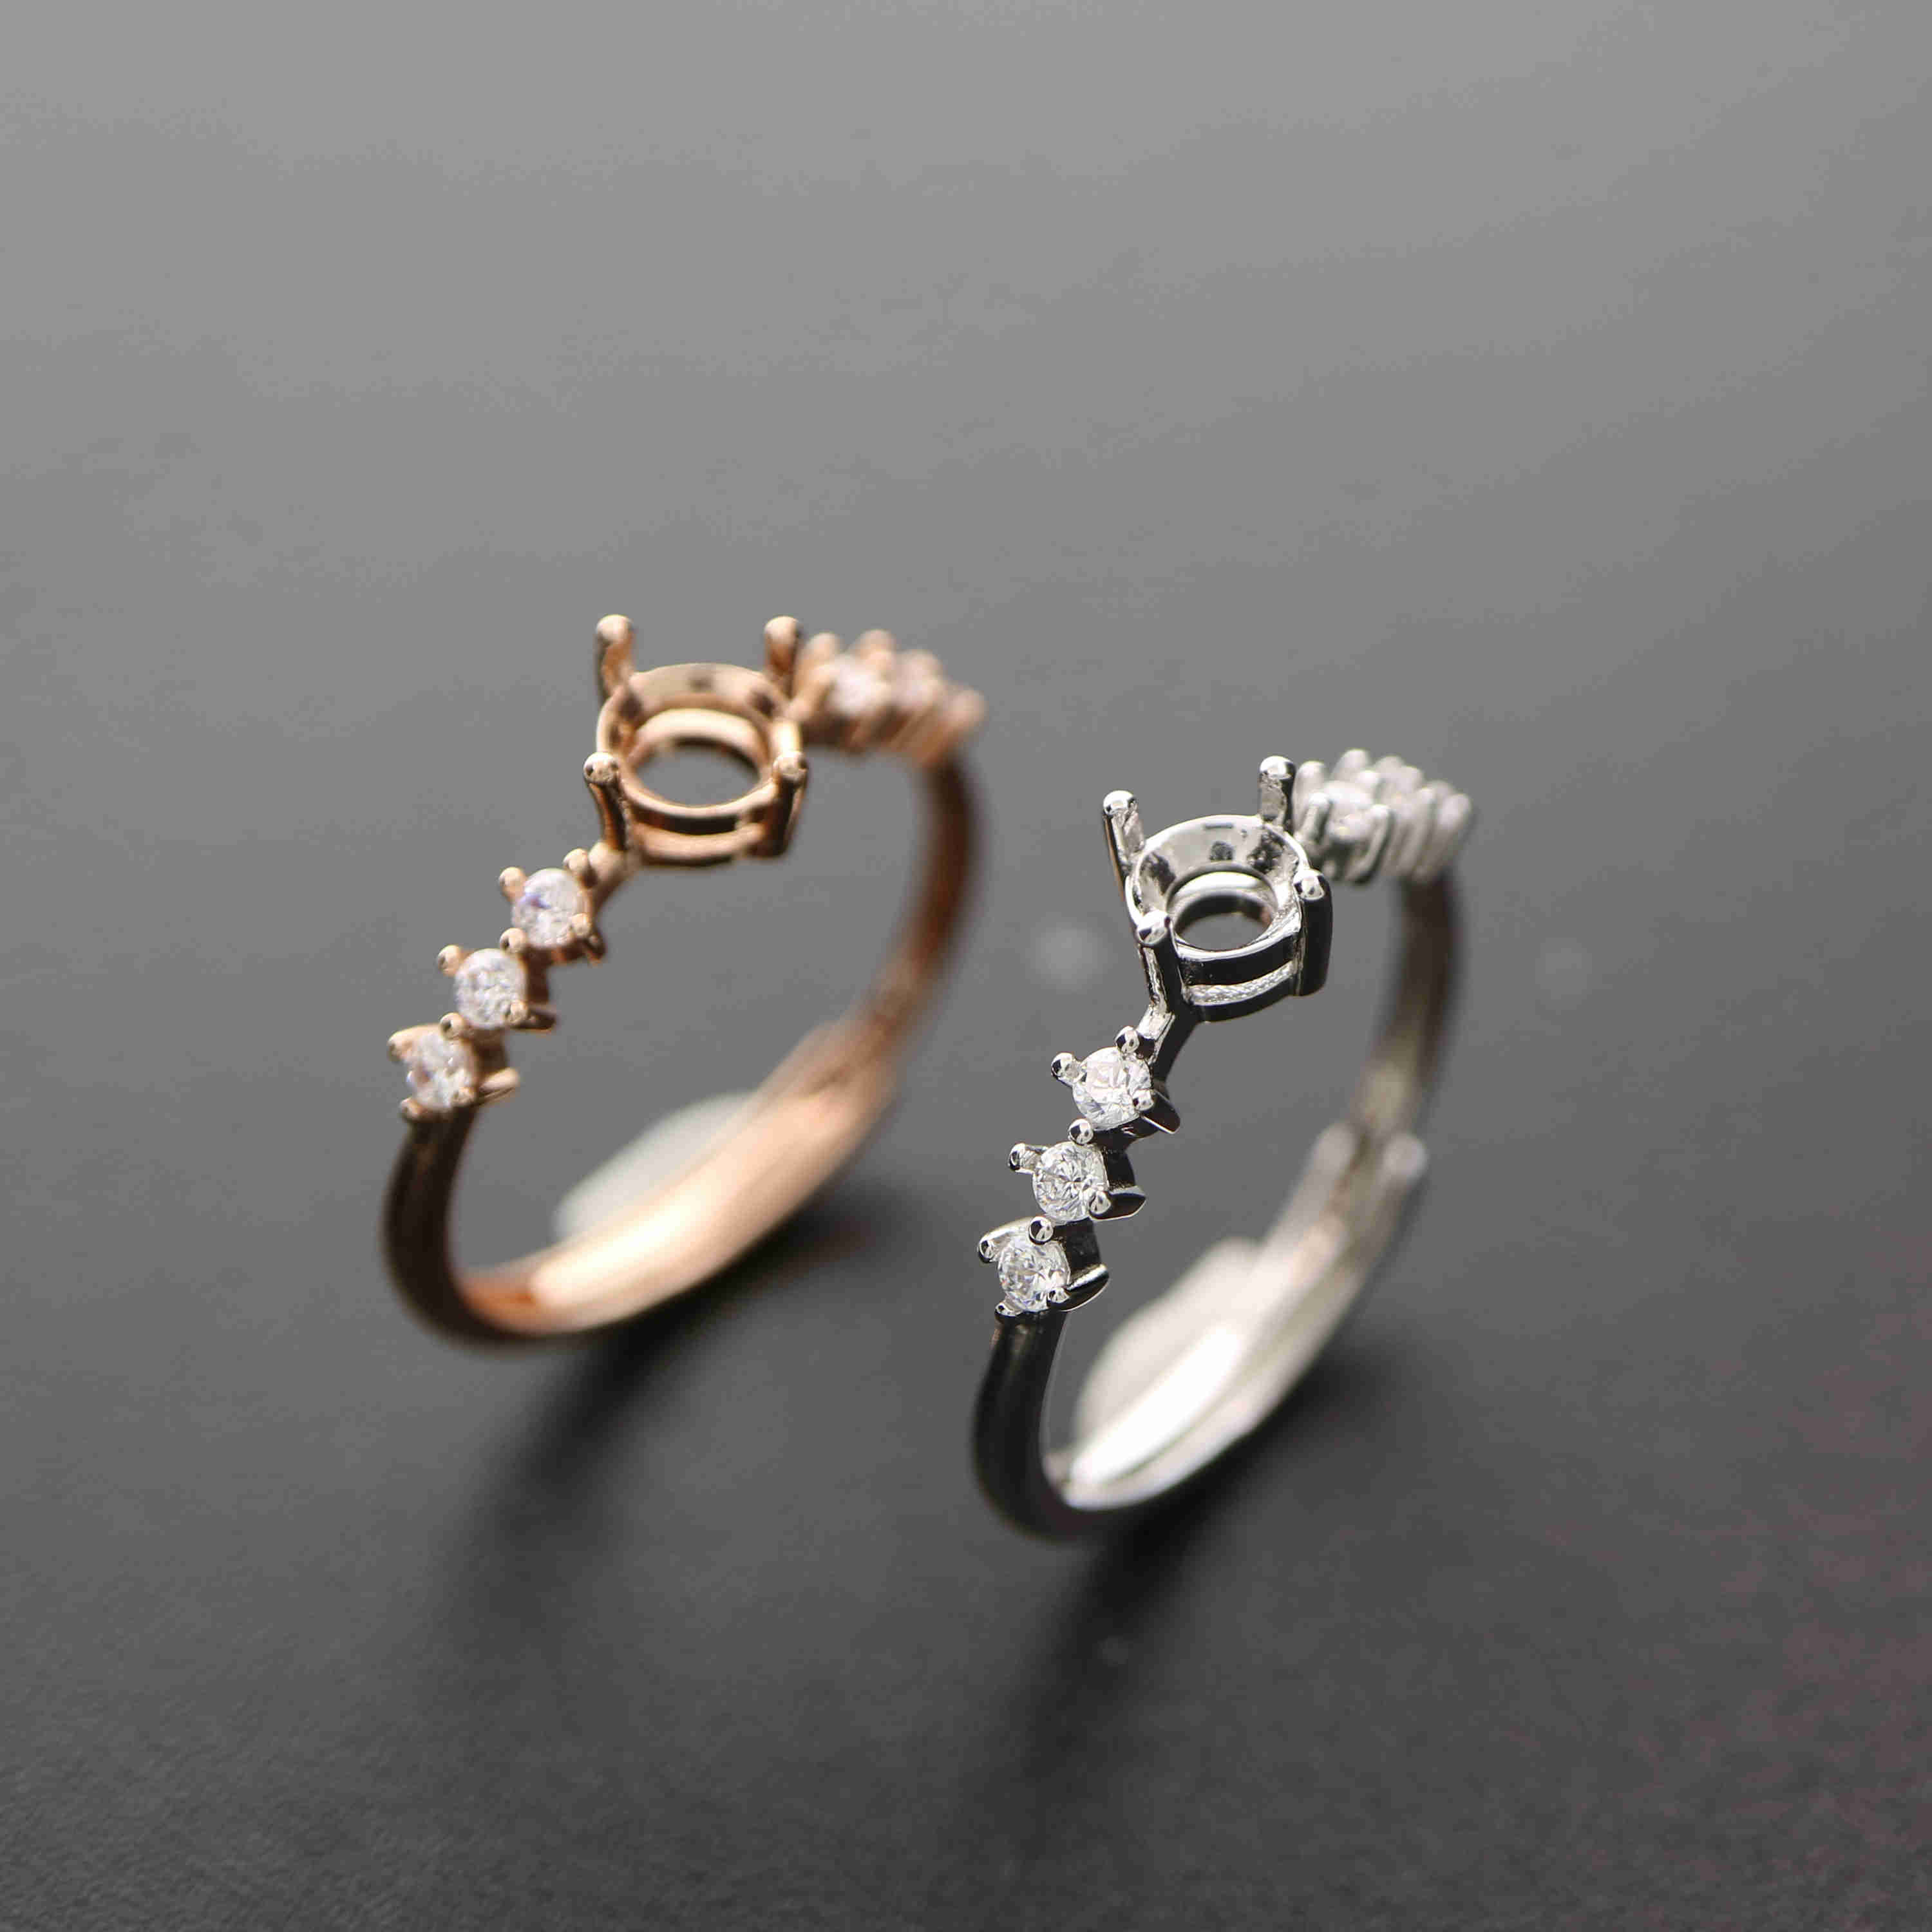 1Pcs 3-7MM Rose Gold Silver Round Gems Cz Stone Prong Bezel Solid 925 Sterling Silver Adjustable Ring Settings 1210030 - Click Image to Close